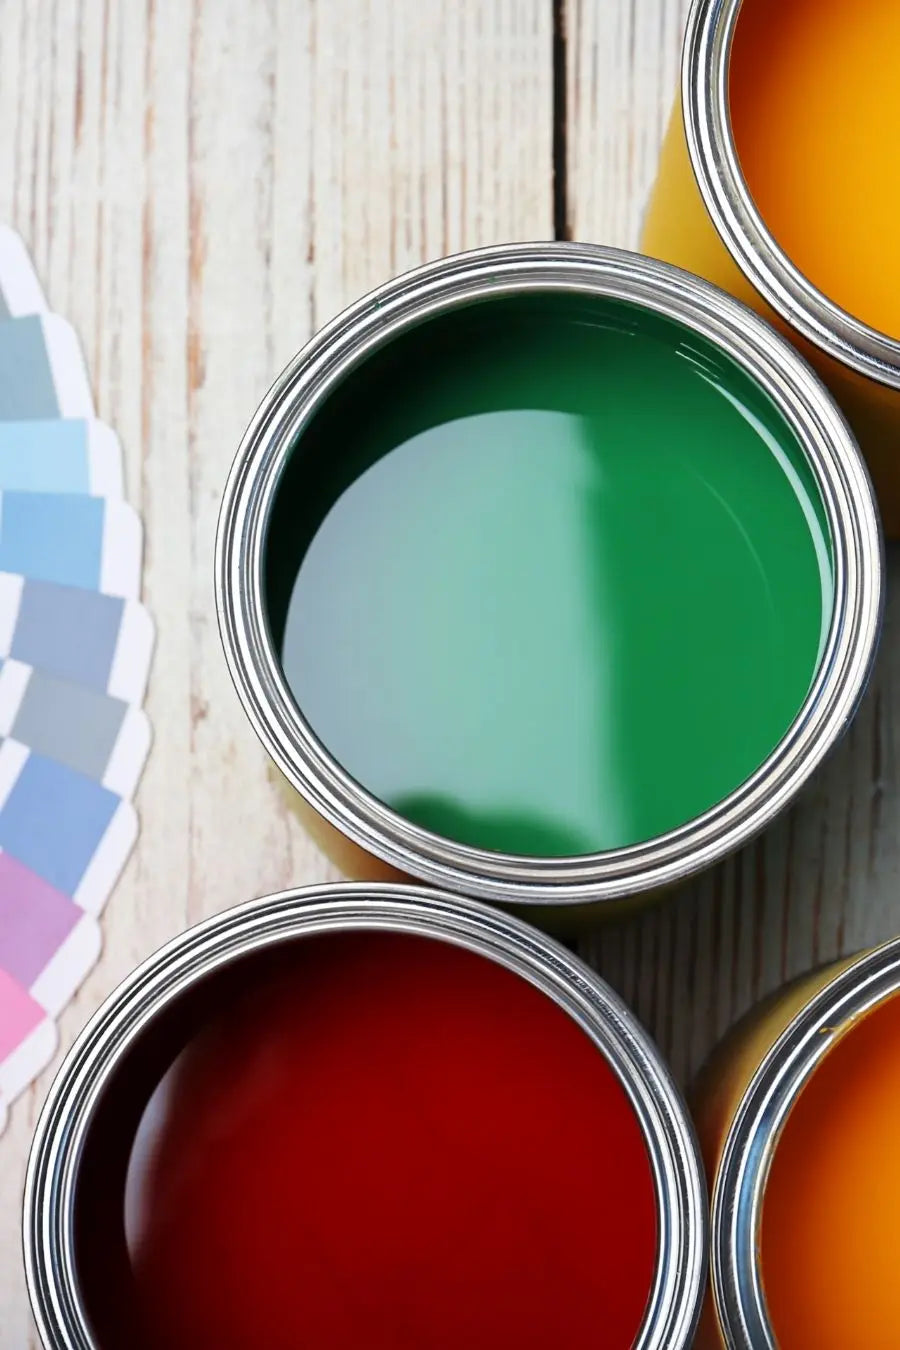 Fusion Mineral Paint: What Is It? - Home Smith